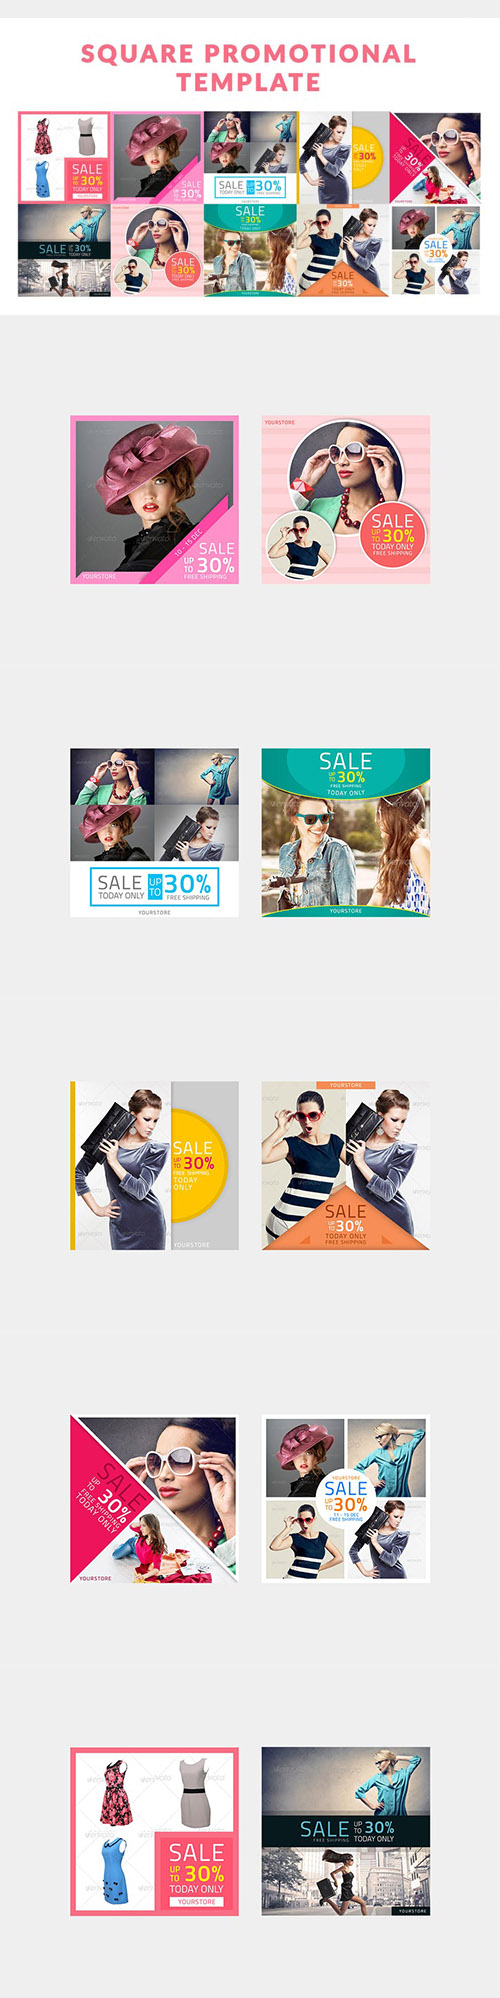 Square Promotional Template - EUU5GY